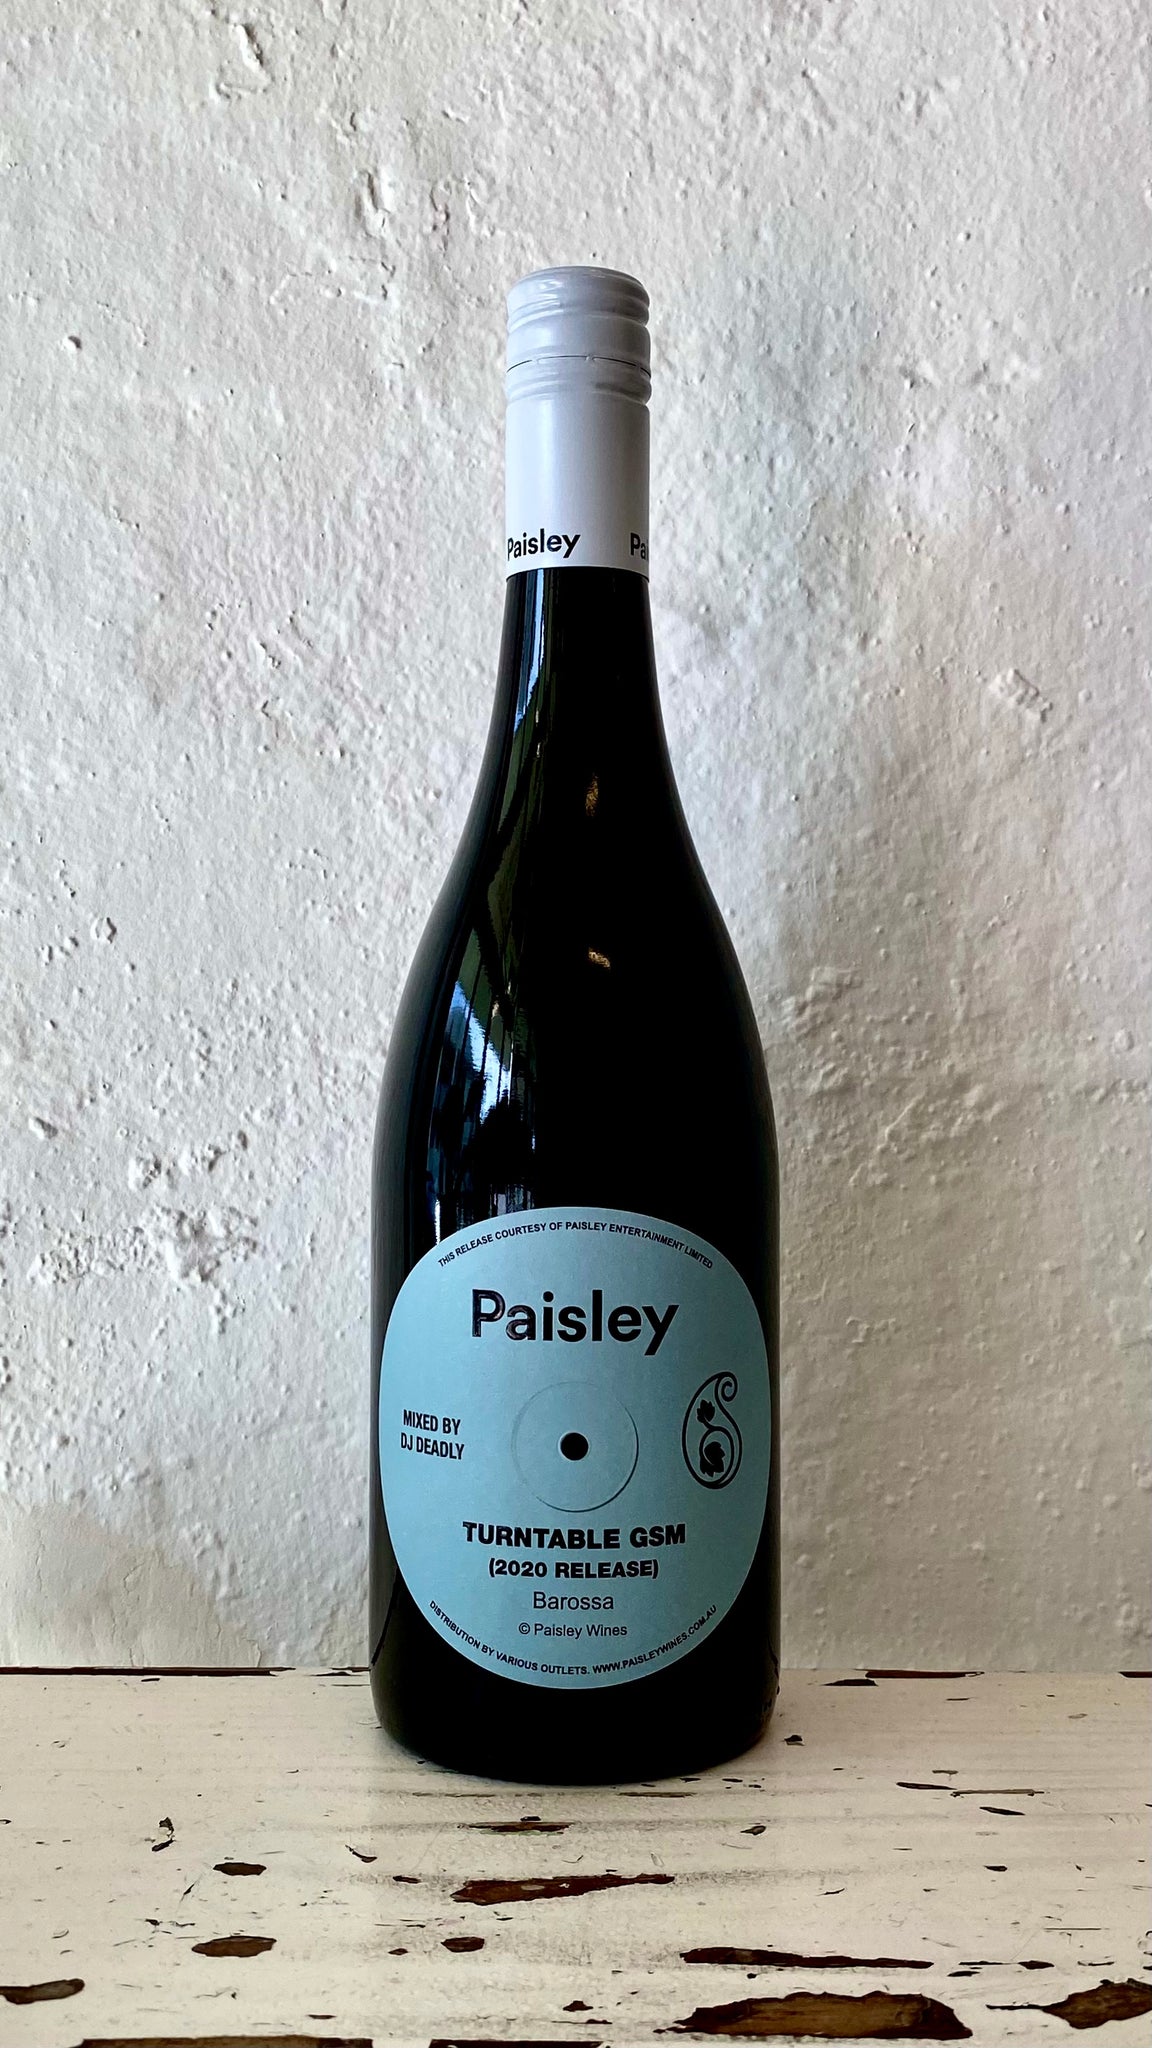 2020 Paisley Wines Mixed by DJ Deadly Turntable GSM